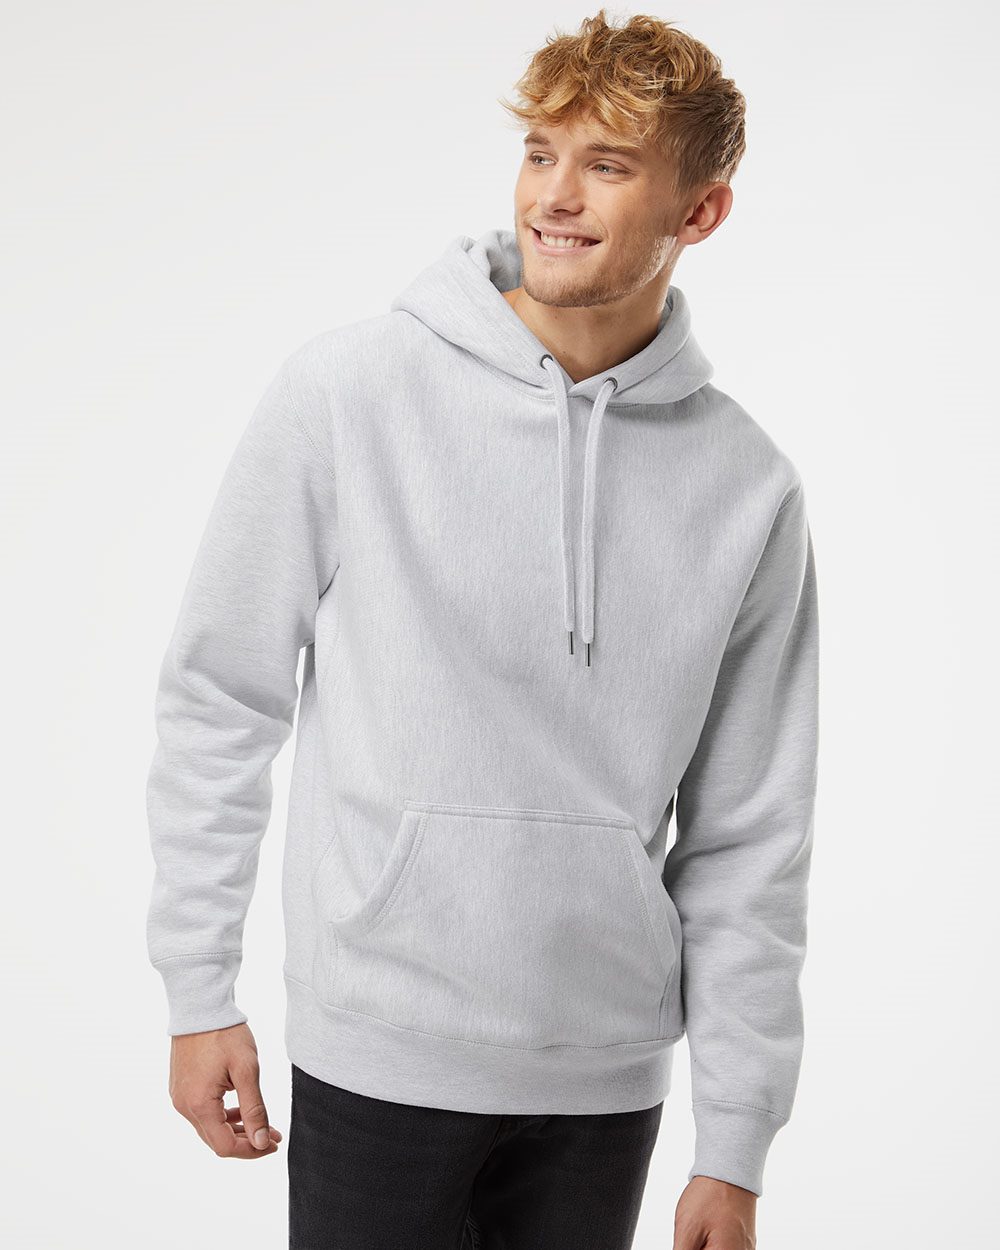 Mens Pullover Sweatshirts  Independent Trading Company